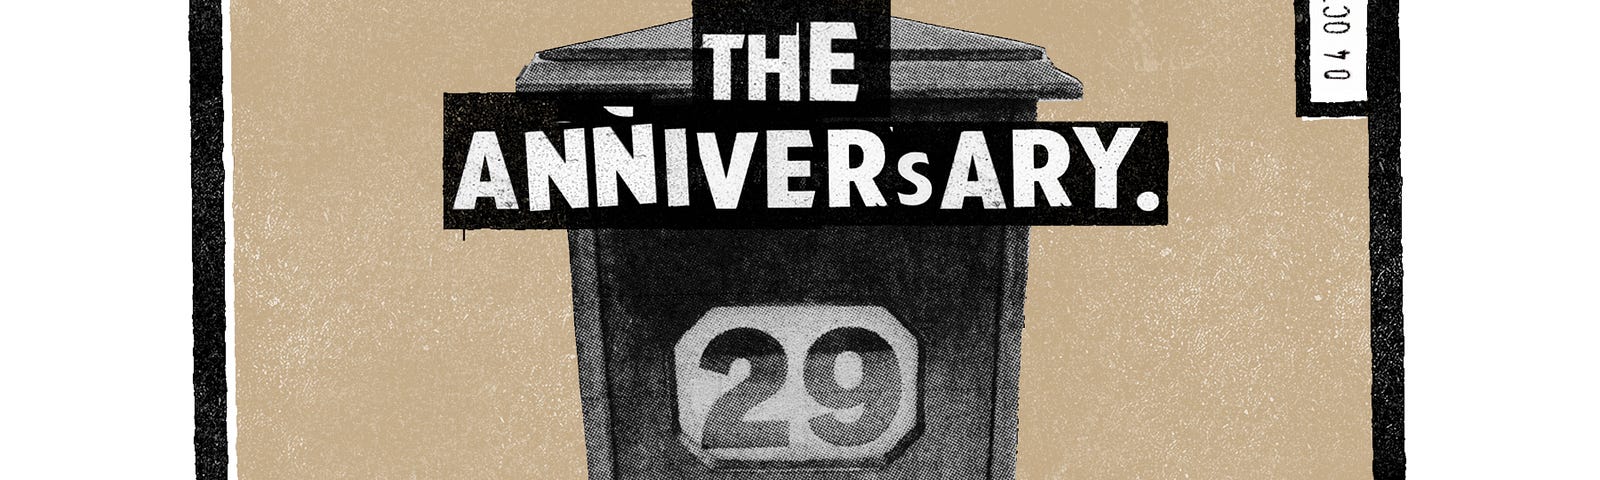 An image of a wooden desk calendar on a tan background with the words ‘The anniversary’.